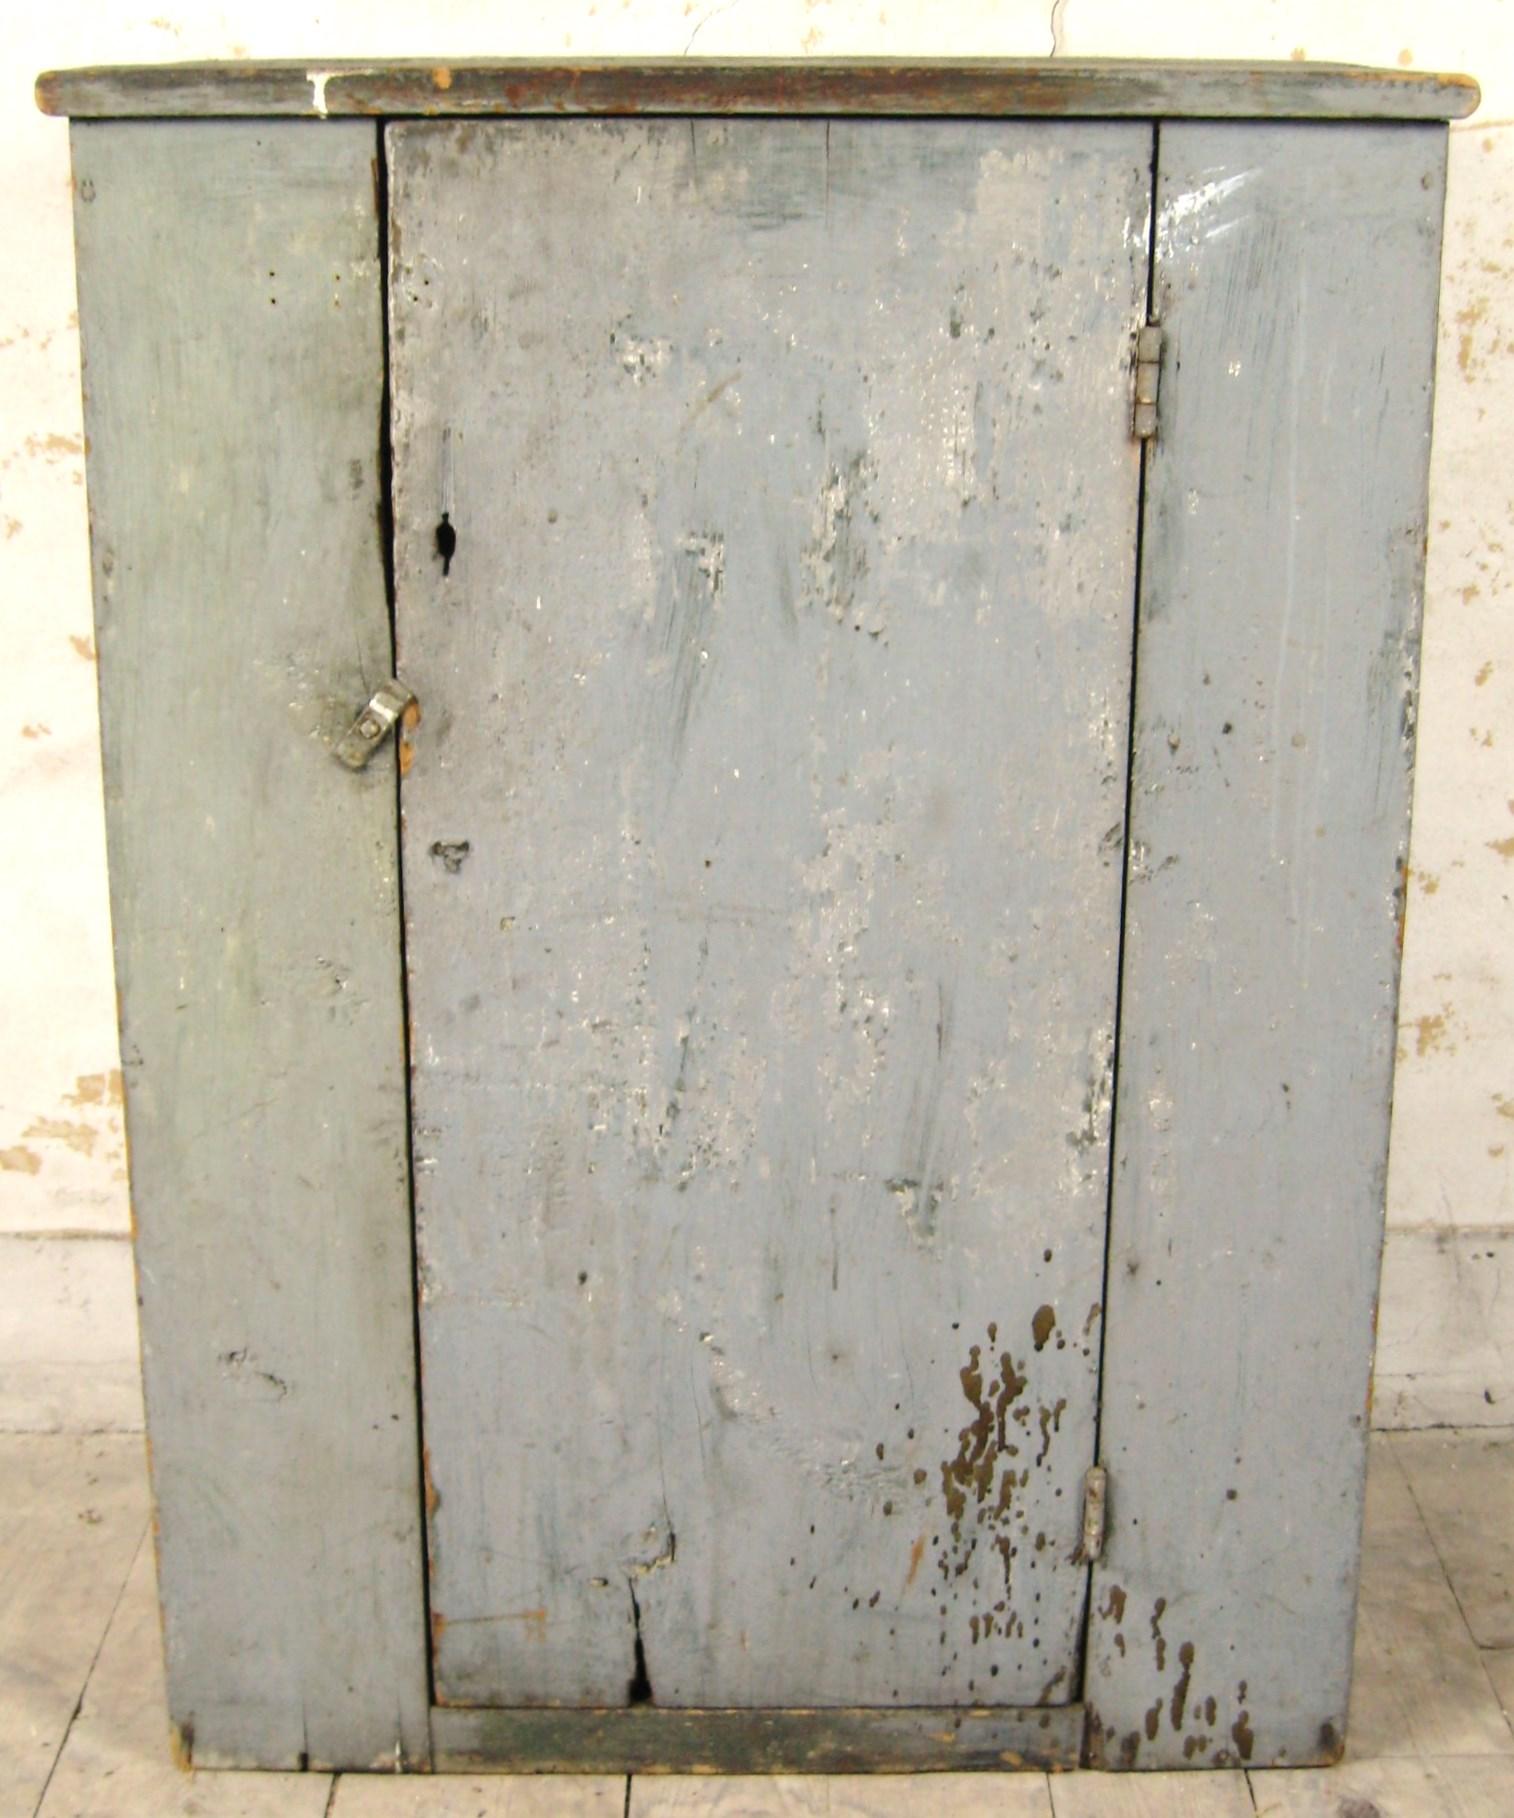 This authentic Primitive Blind door painted 1910s cupboard, it has many layers of paint which are worn through in many spots to reveal the original color. This is a rare find for collectors and enthusiasts of historical furniture. Its timeless style